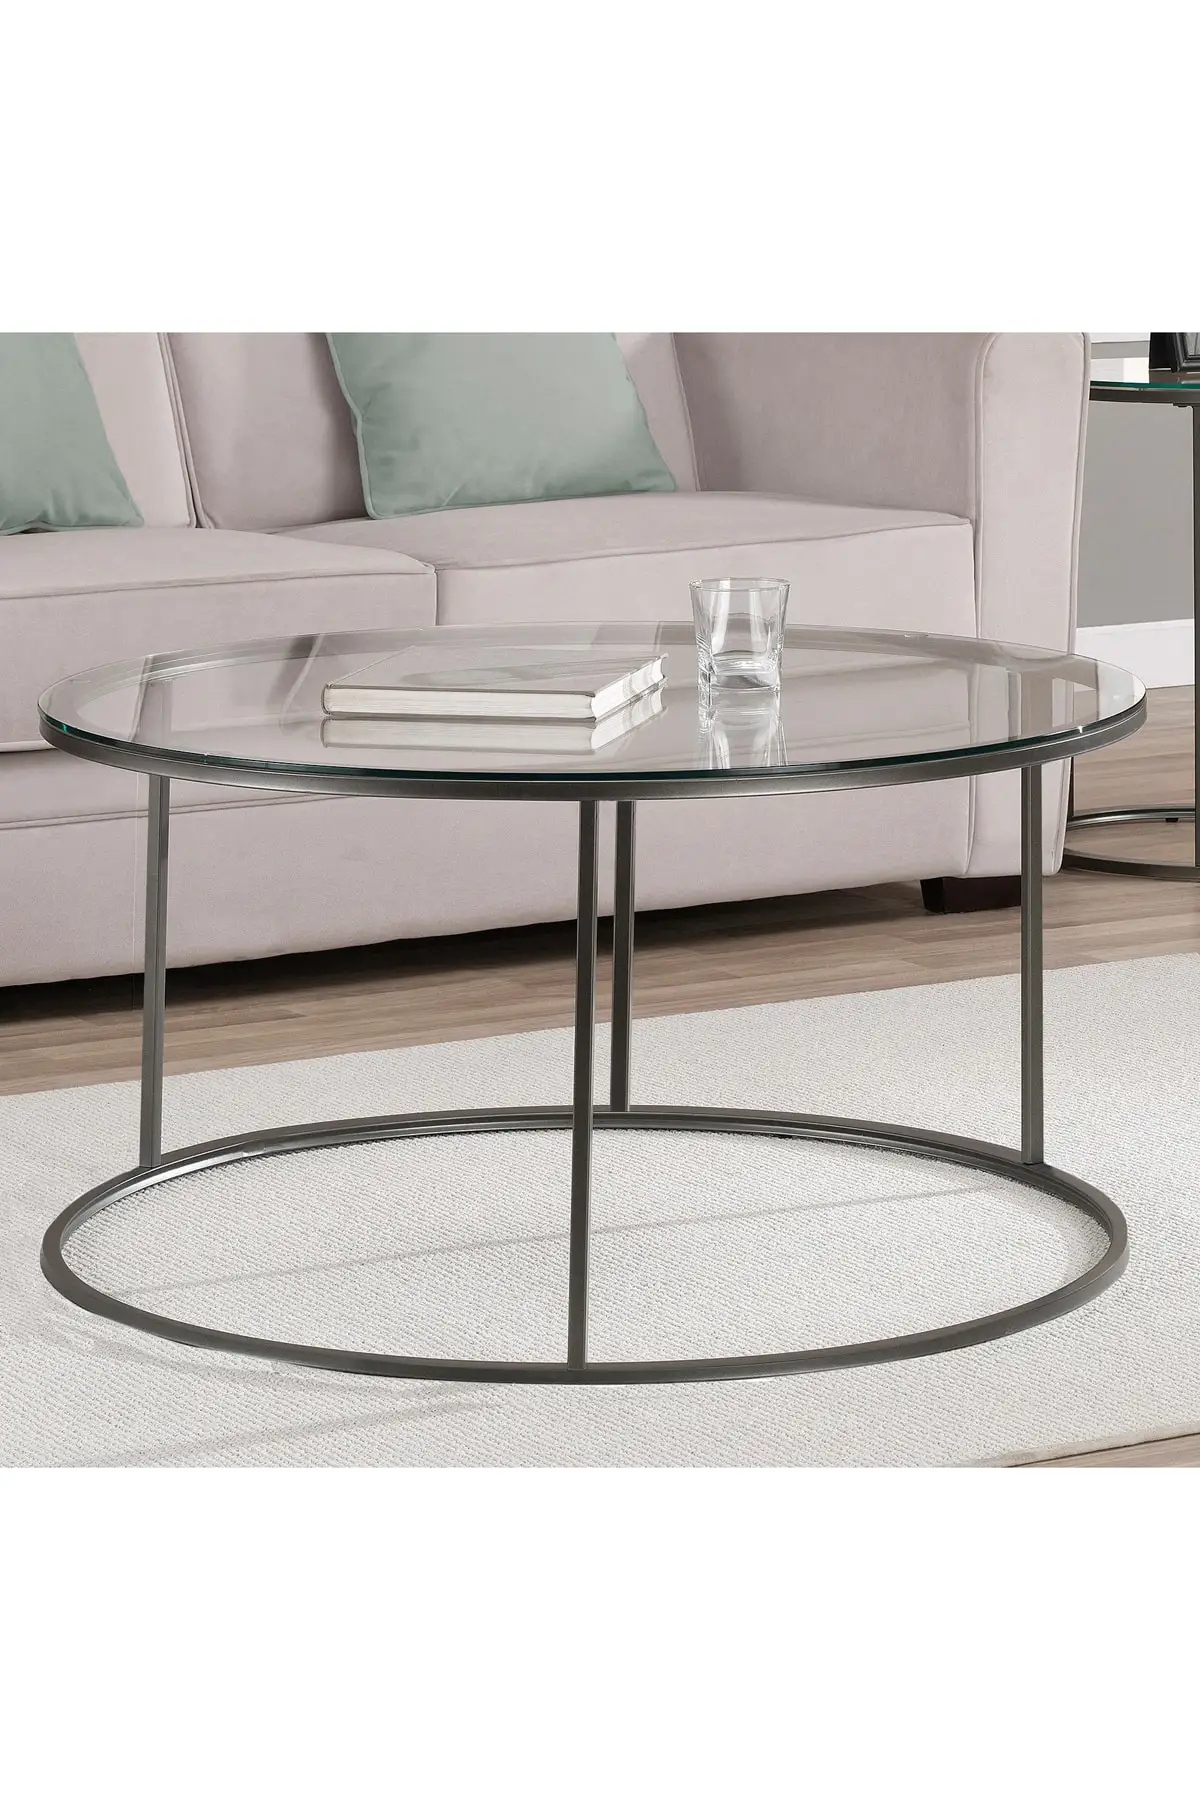 

Silver Metal Center Coffee Table Unbreakable Mirrored Glass Single Scandinavian Side Table Tea Coffee Serving Table Round Living Room Bedside Table